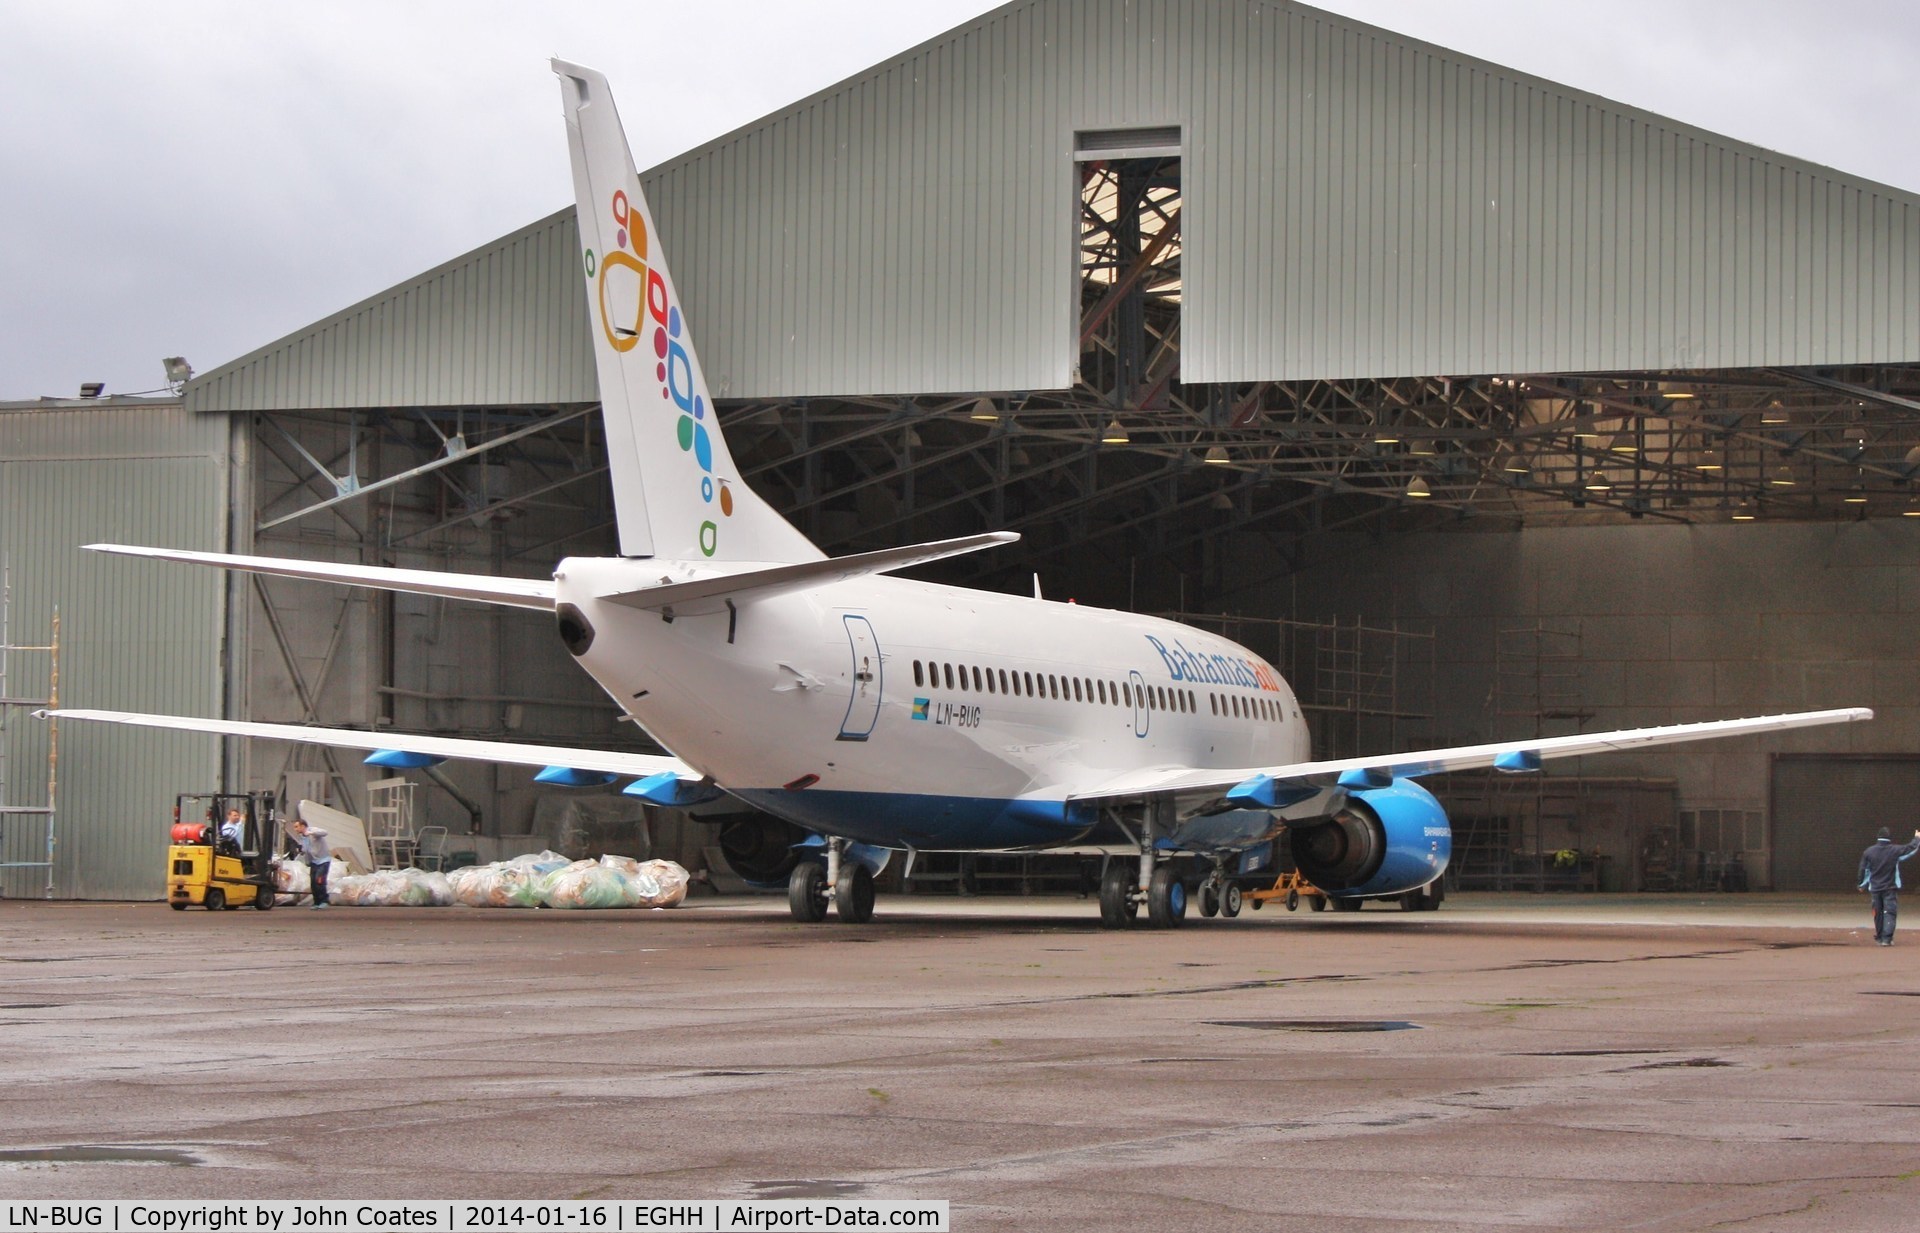 LN-BUG, 1997 Boeing 737-505 C/N 27631, Exiting paintshop after respray to Bahamasair livery